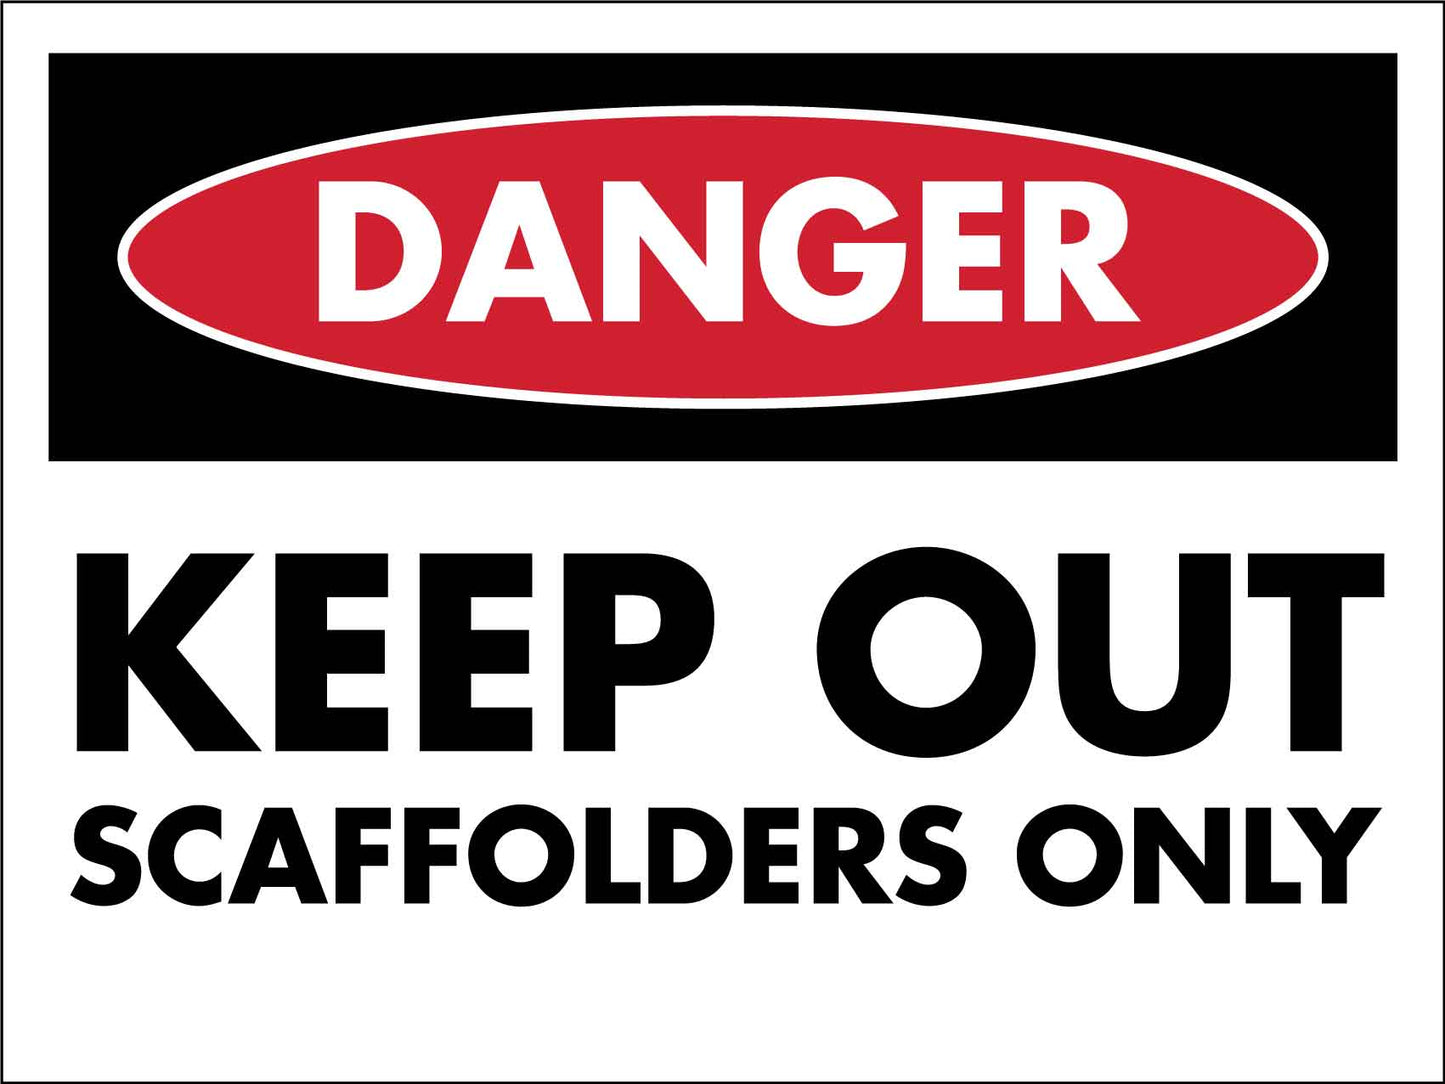 Danger Keep Out Scaffolders Only